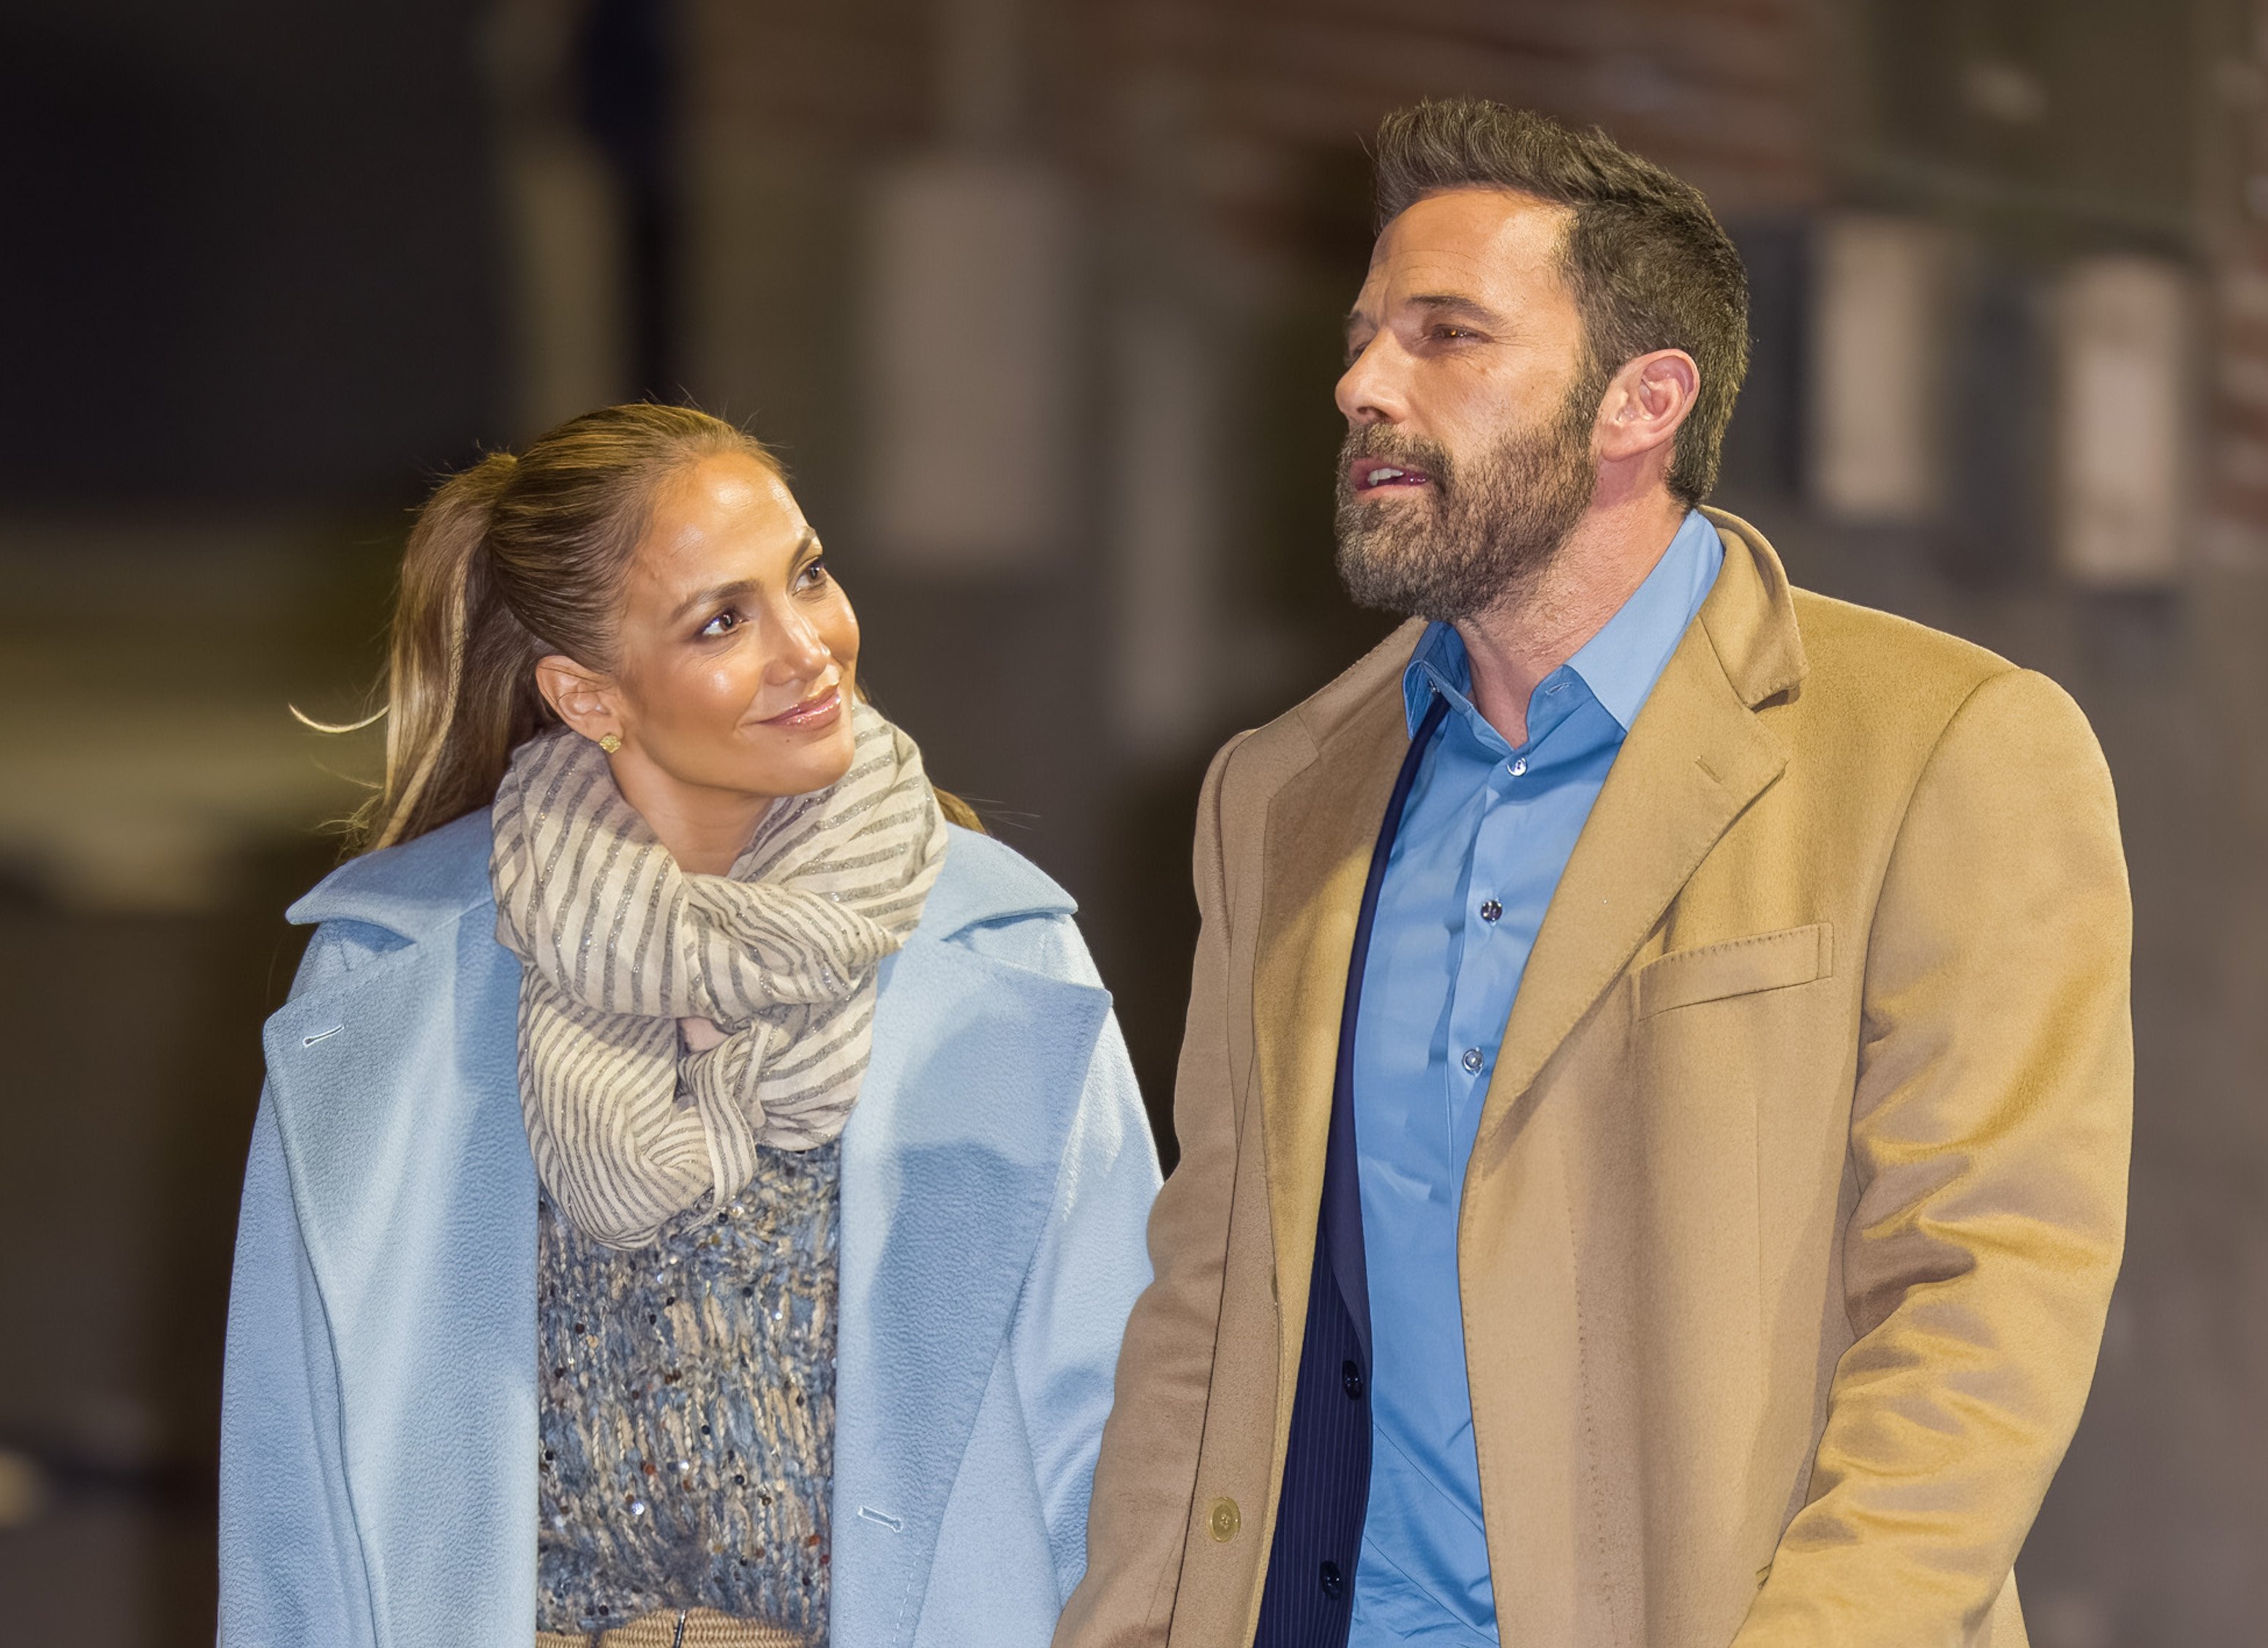 Jennifer Lopez looks at Ben Affleck as they hold hands and walk down the street.